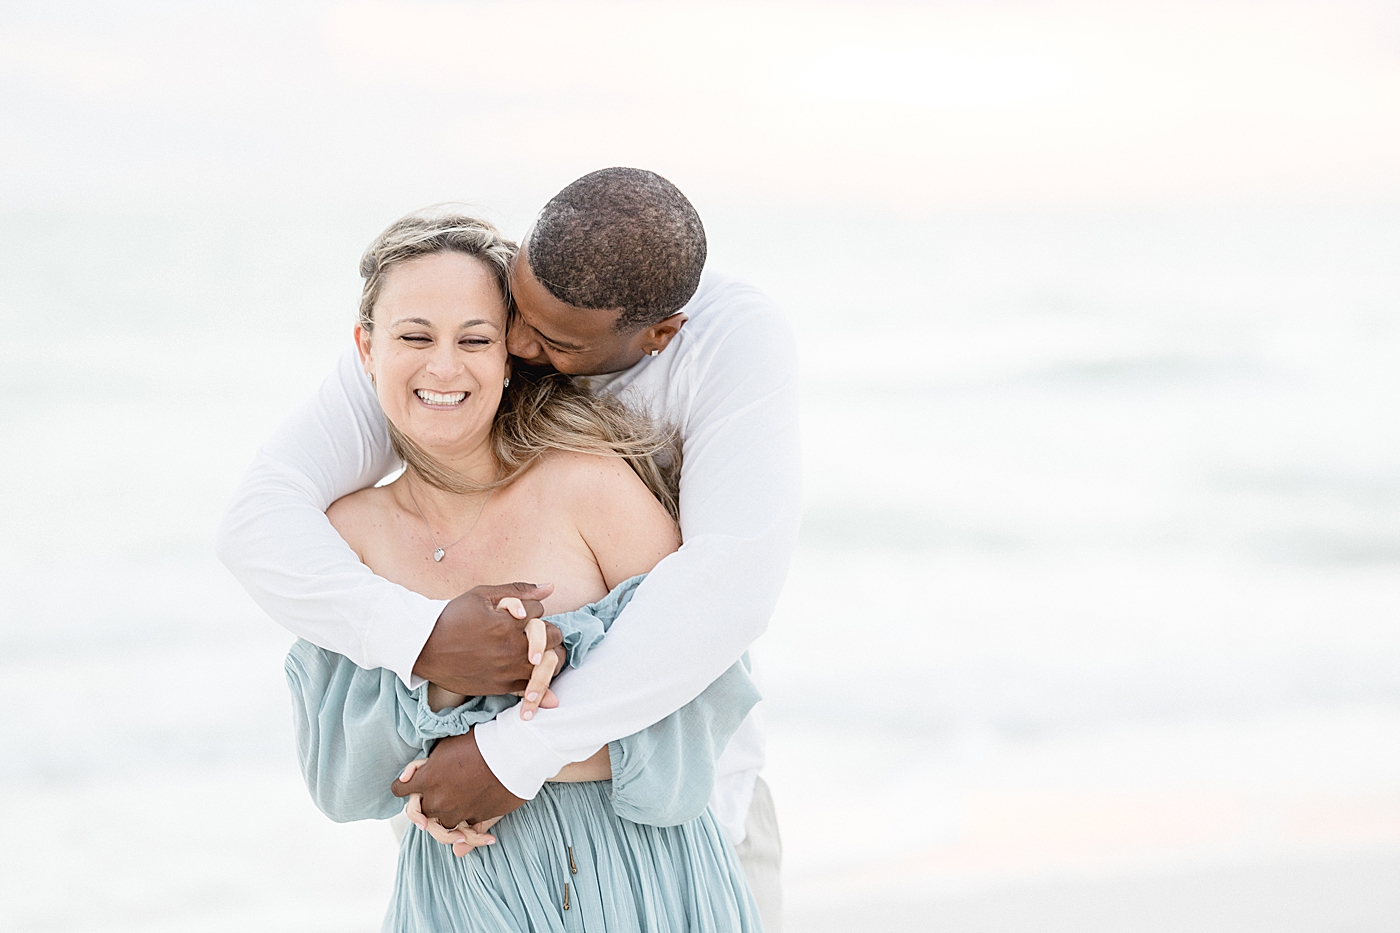 Husband embracing his wife with a hug on the beach. Photo by Brittany Elise Photography.